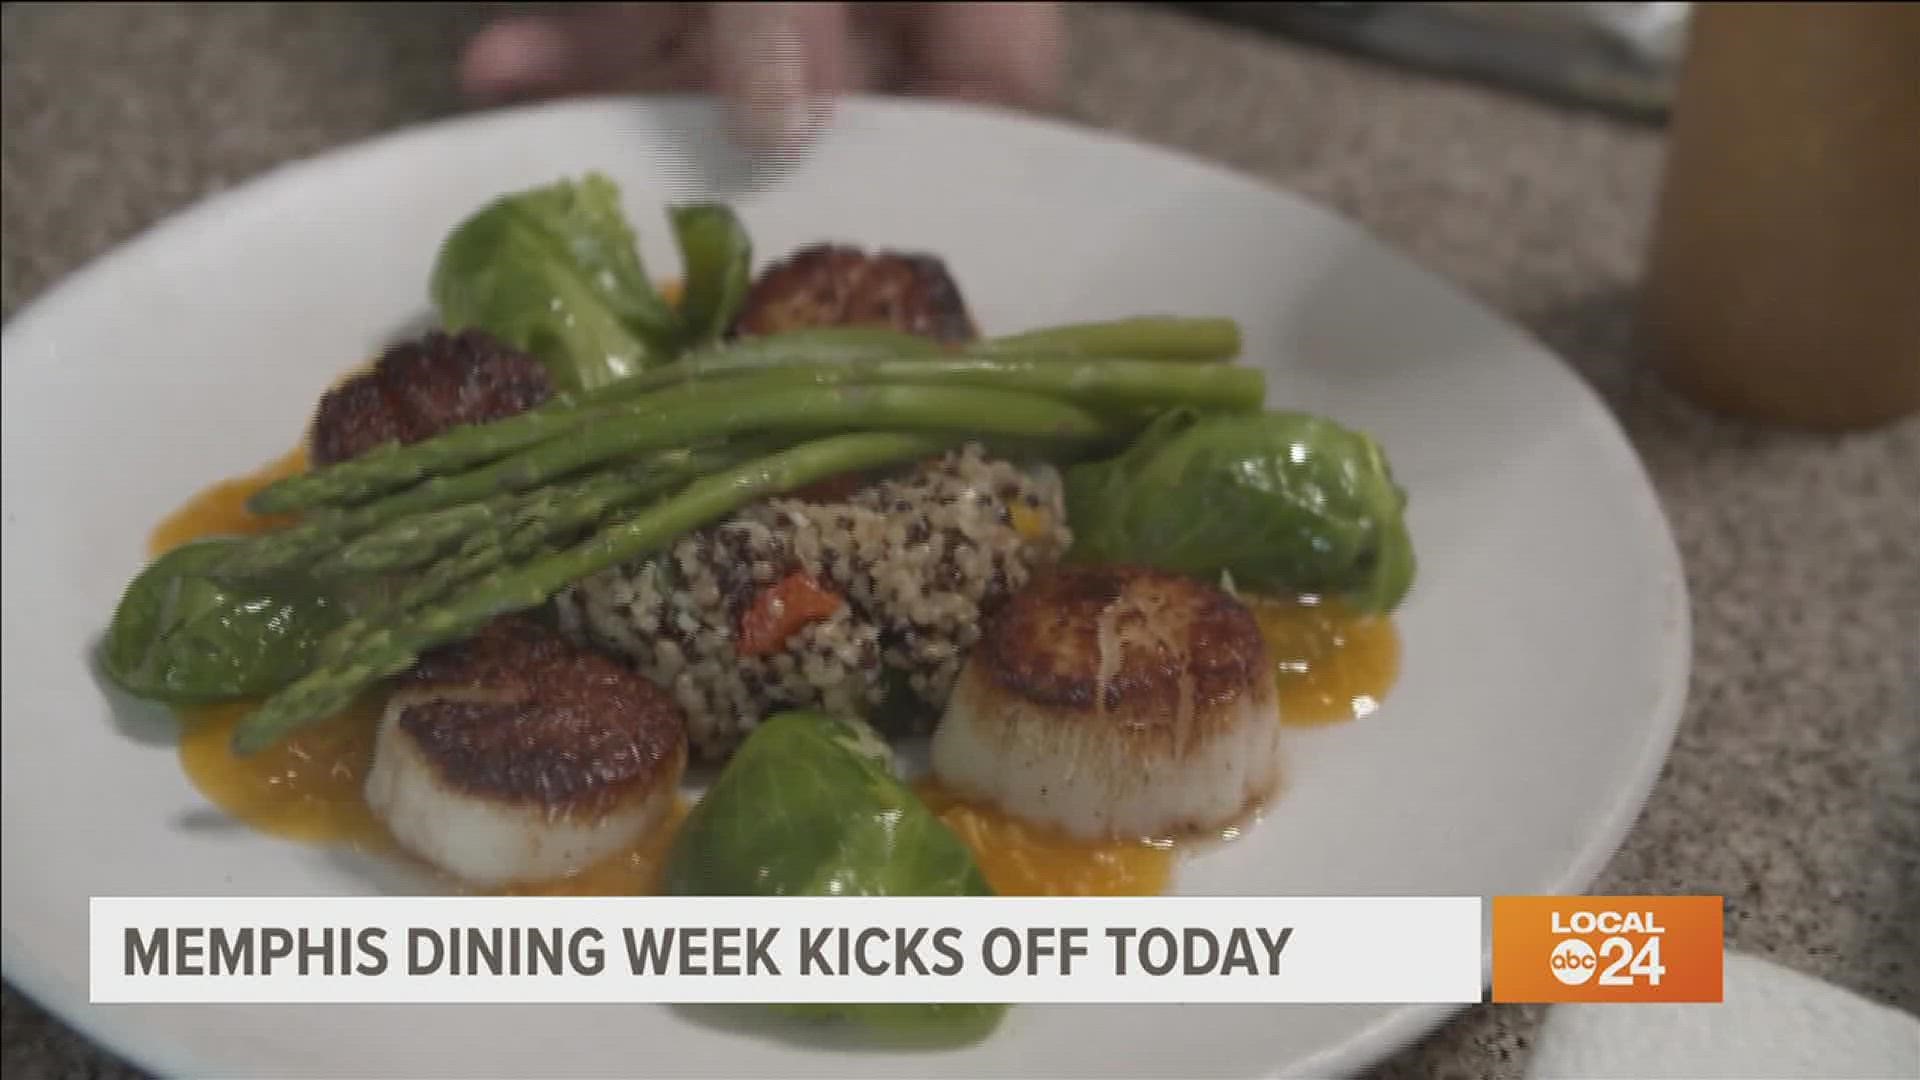 The inaugural Memphis Dining Week runs 8/17 to 8/22 and features 13 restaurants